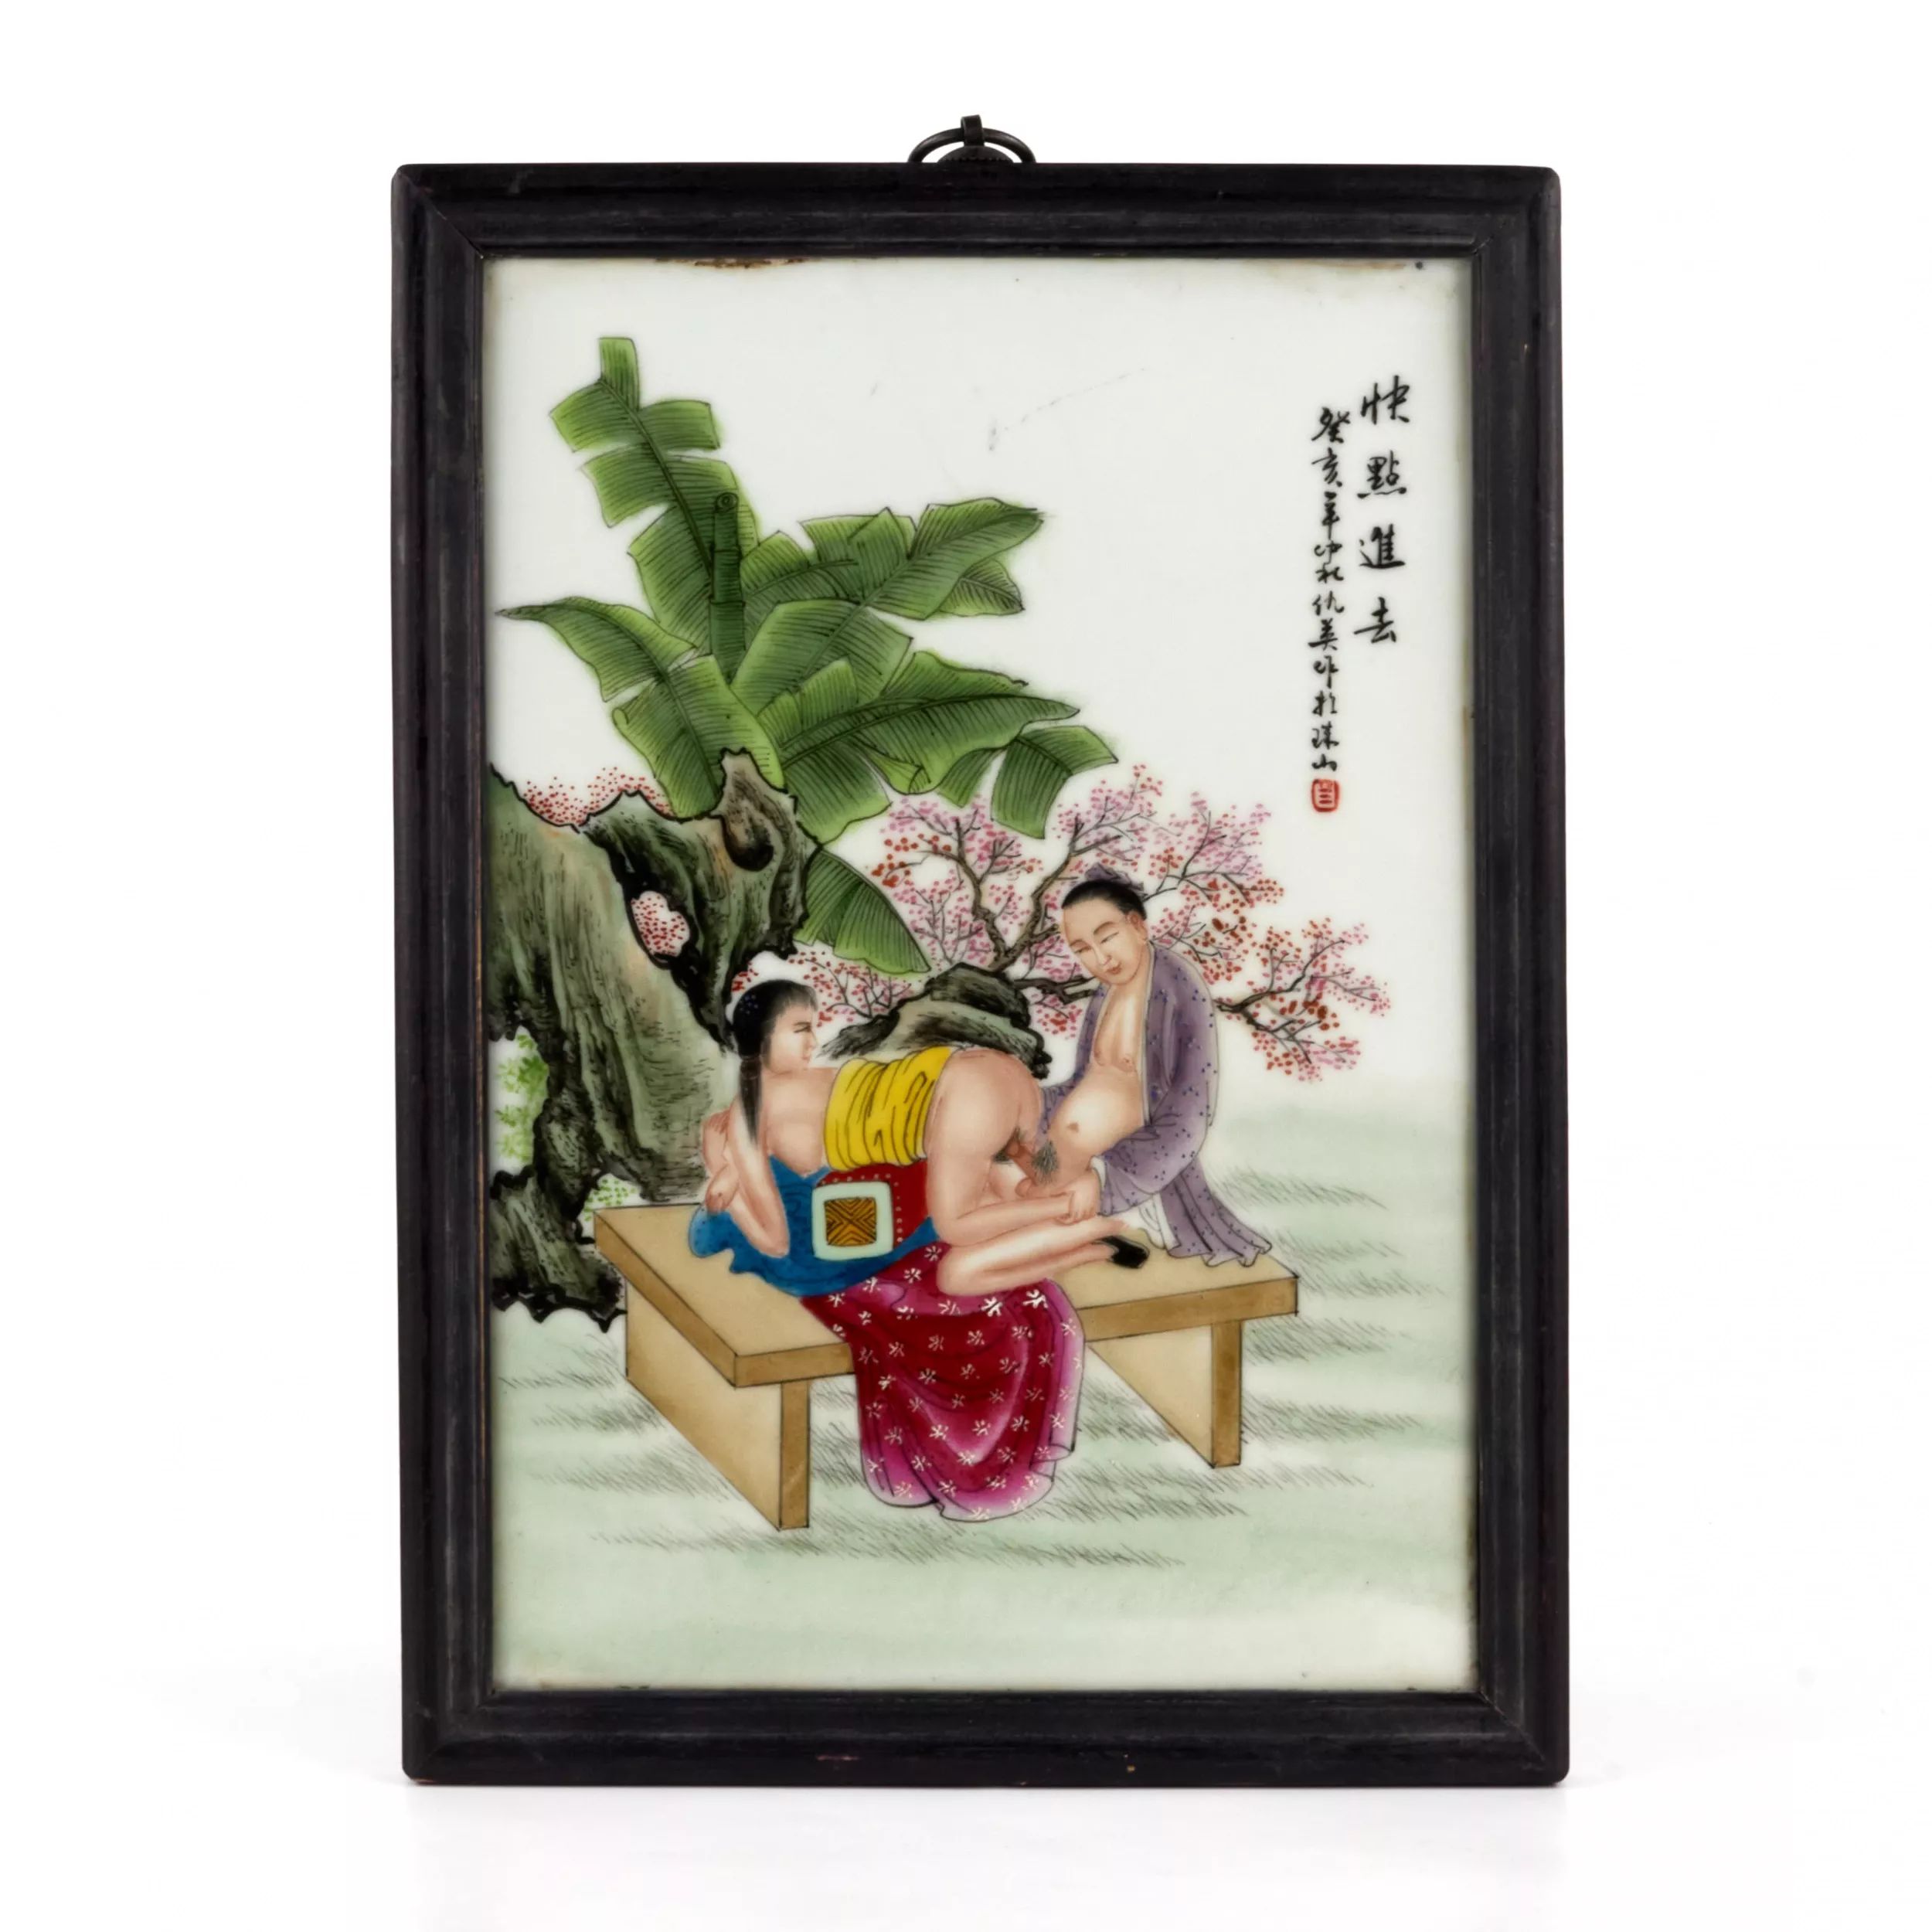 Japanese-porcelain-plate-with-erotic-scene-